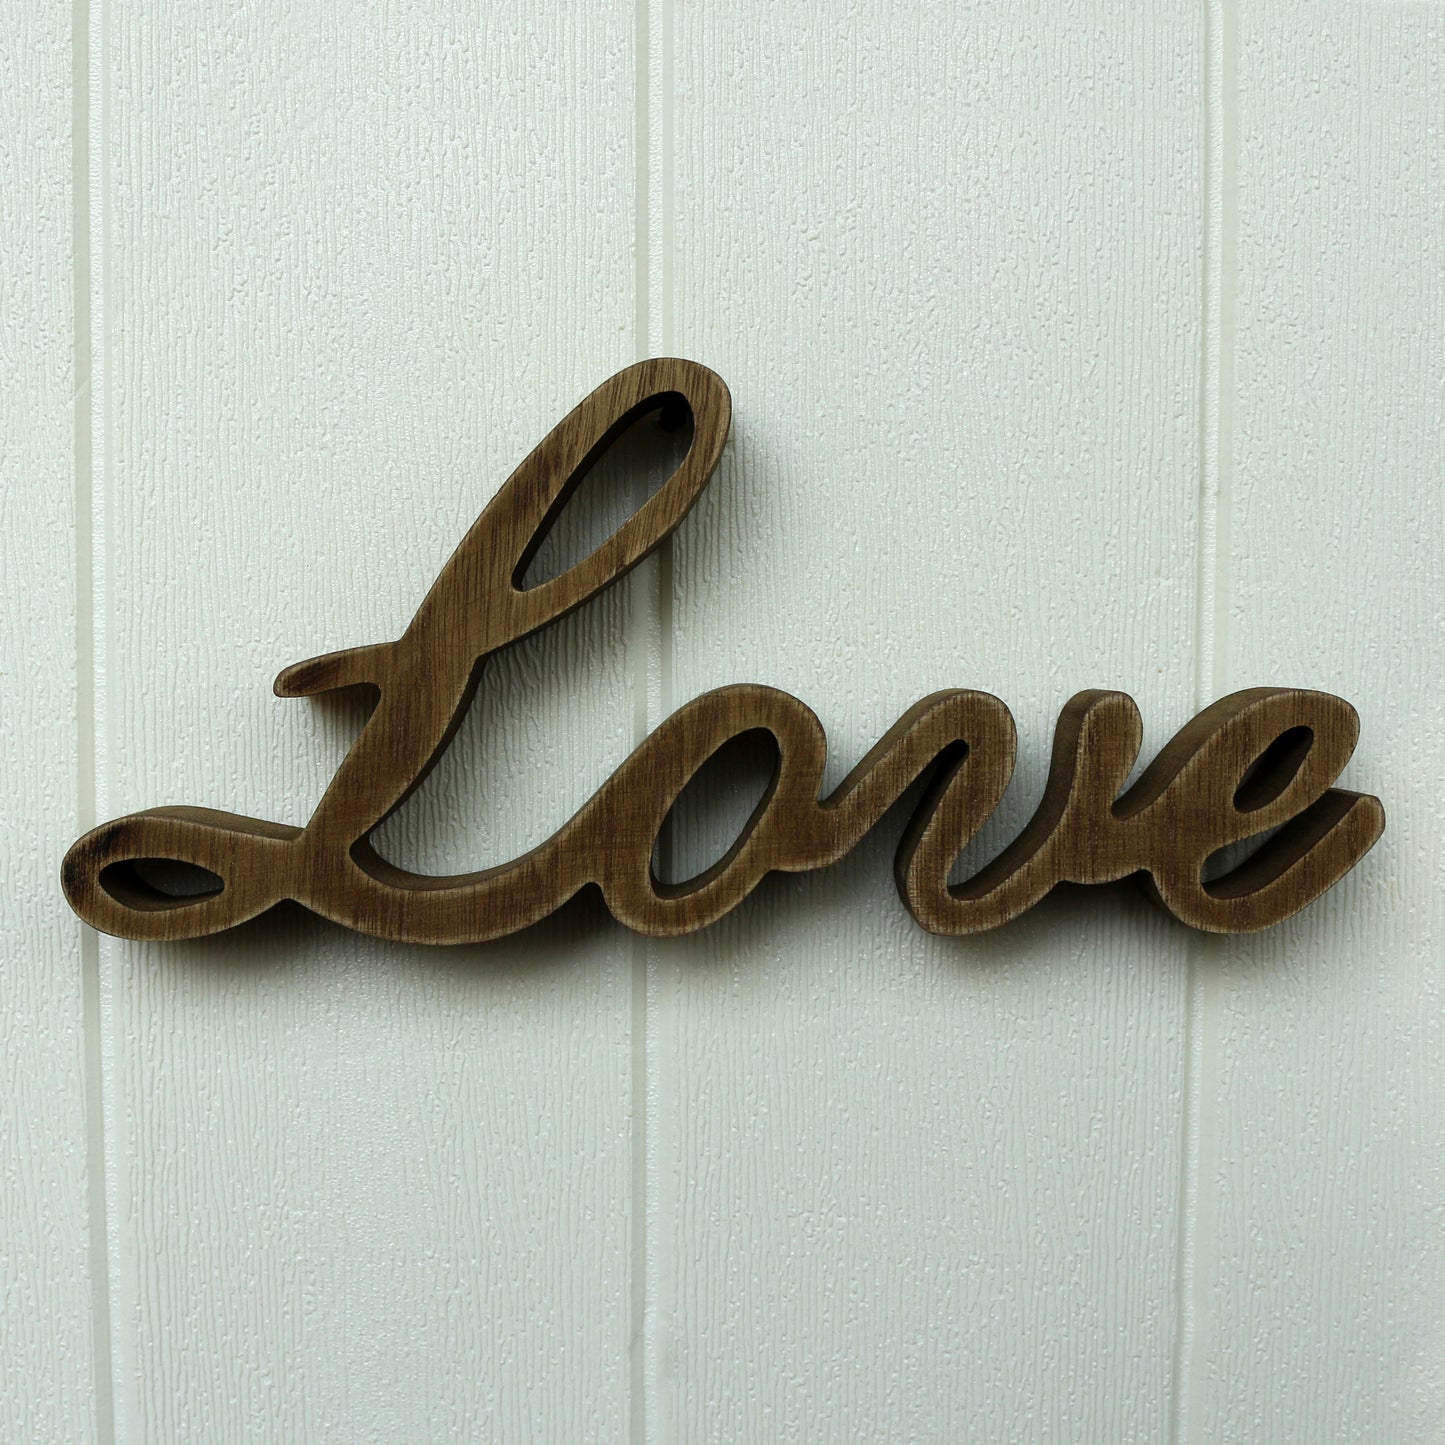 CVHOMEDECO. Rustic Vintage Distressed Wooden Words Sign Free Standing "Love" Tabletop/Shelf/Home Wall/Office Decoration Art, 10.25 x 4.5 x 1 Inch